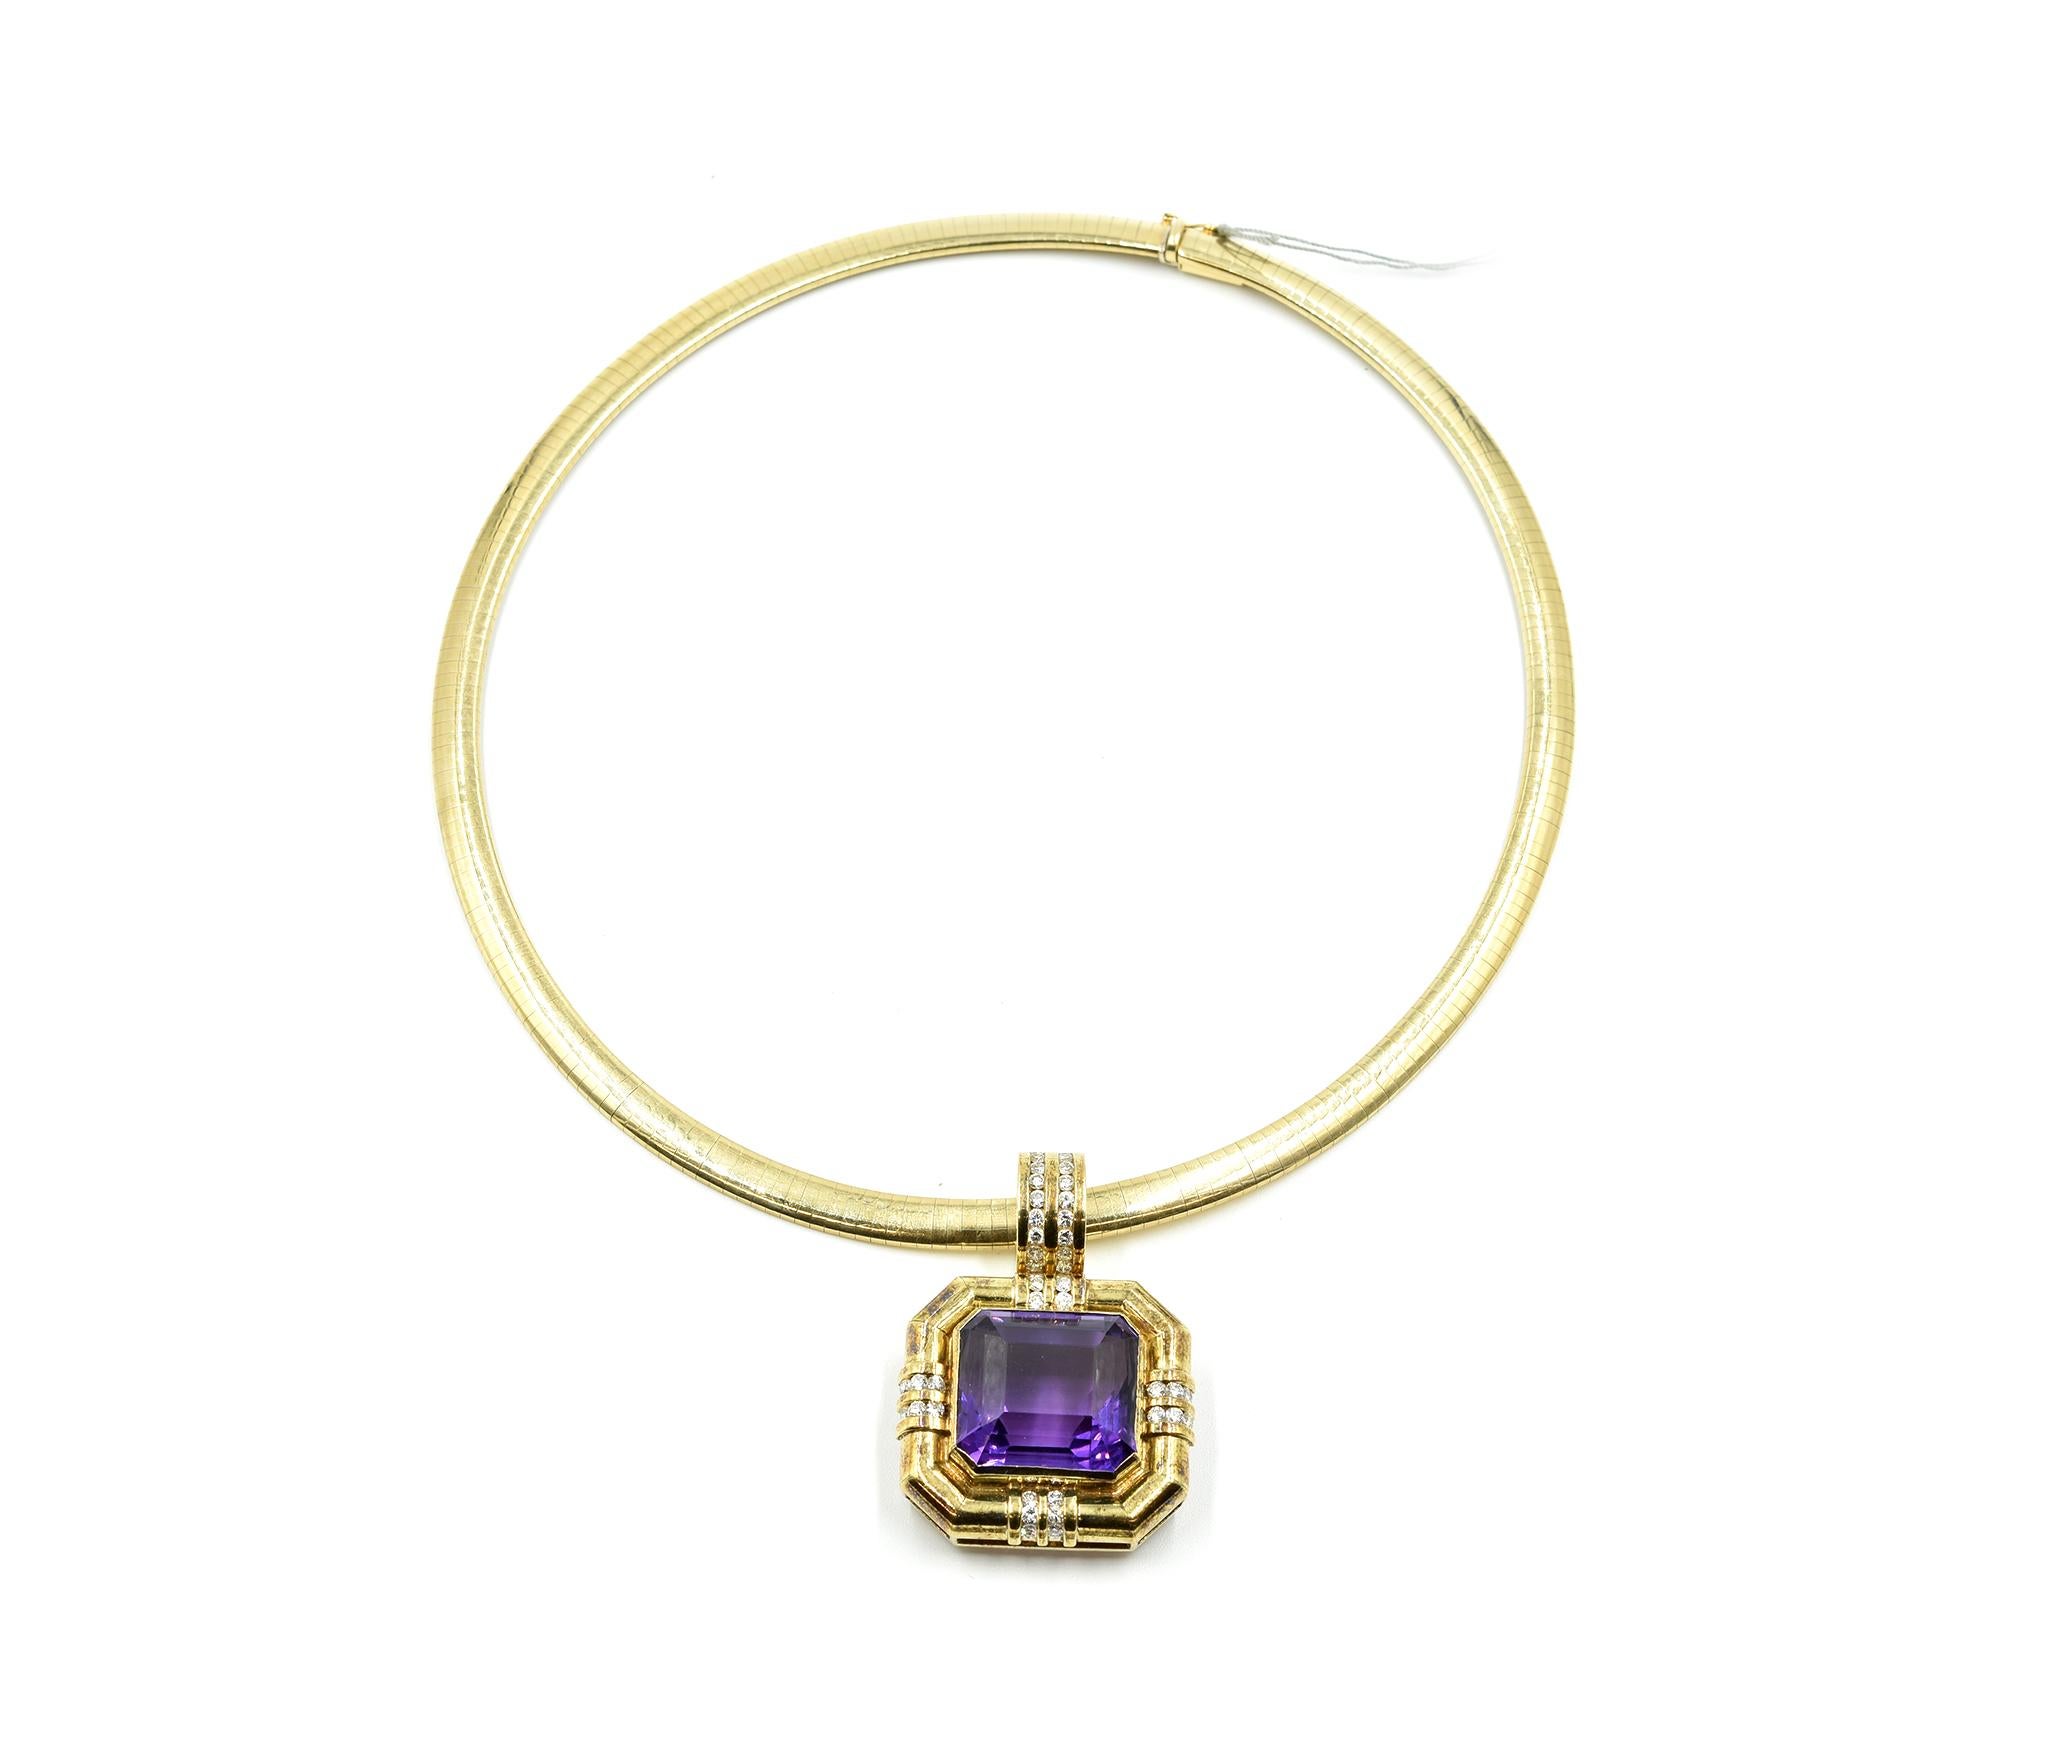 Designer: “LANG”
Material: 14k yellow gold
Amethyst: 39.67 carat amethyst gemstone
Diamonds: 42 round brilliant cut diamonds = 1.68 carat total weight
Dimensions: pendant measures 3/4-inches long and 1 1/4-inches wide
Weight: 23.00 grams
